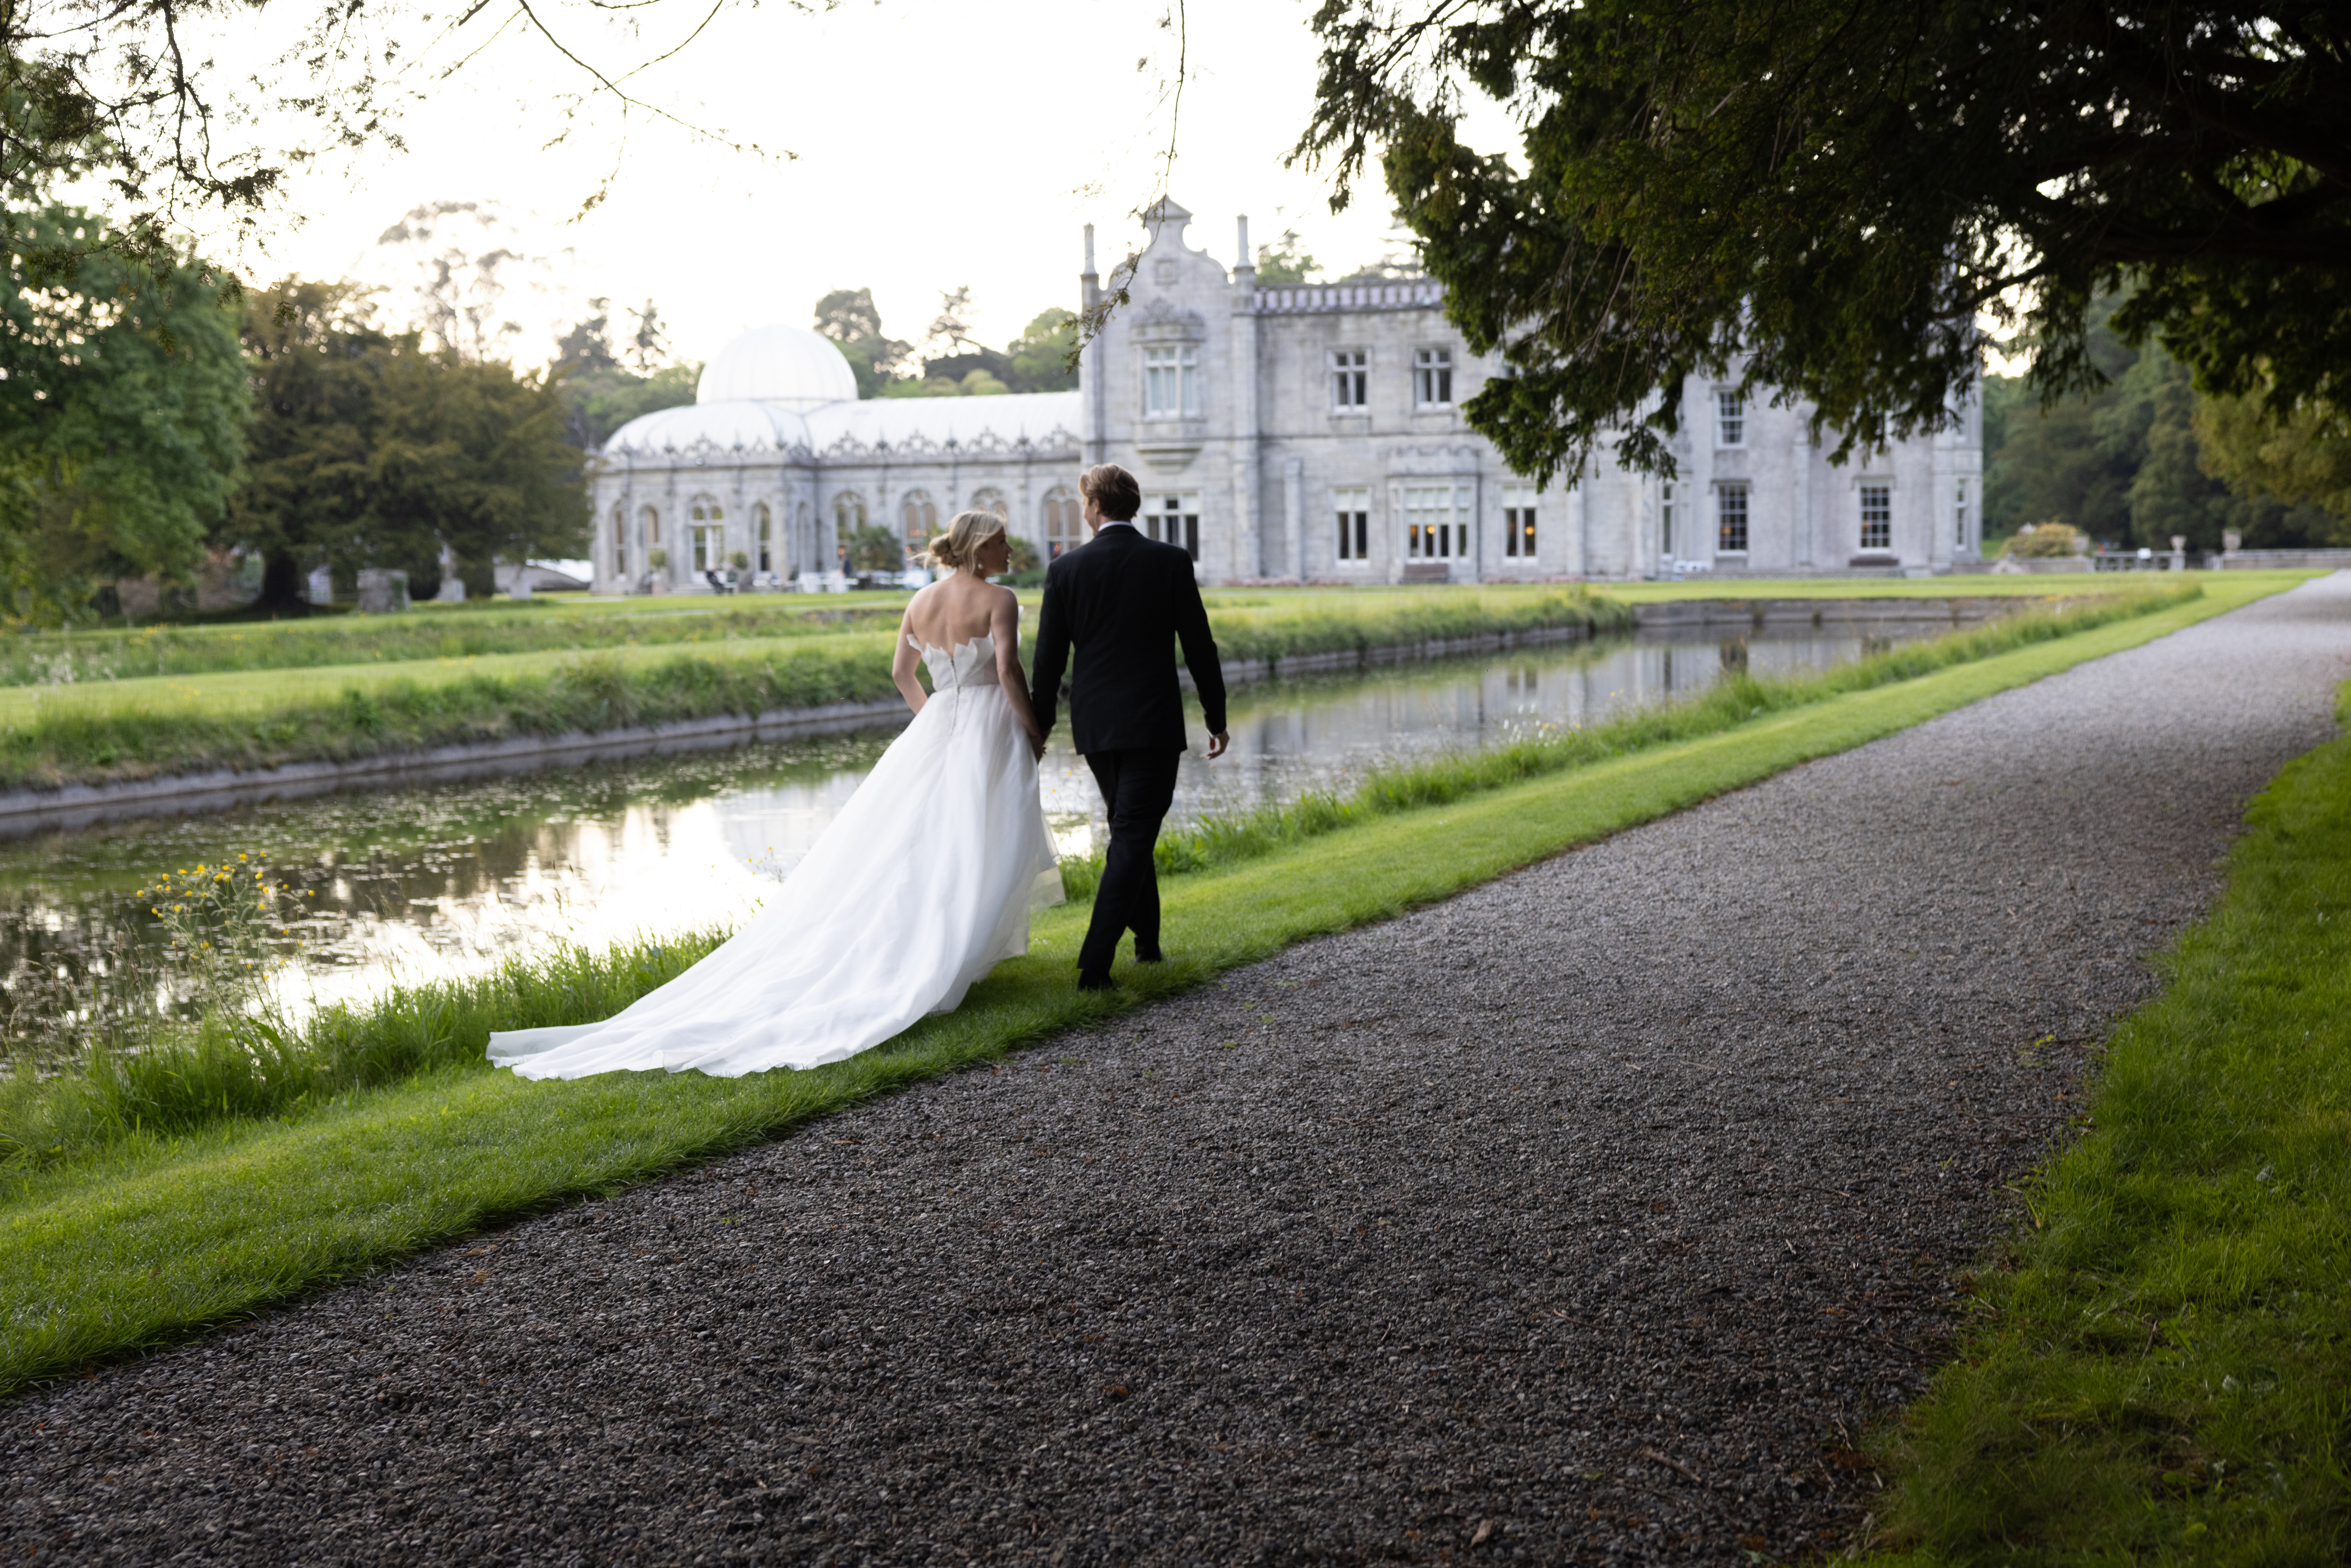 A Dream Wedding at Killruddery House: Brett and Jos’ Unforgettable Day